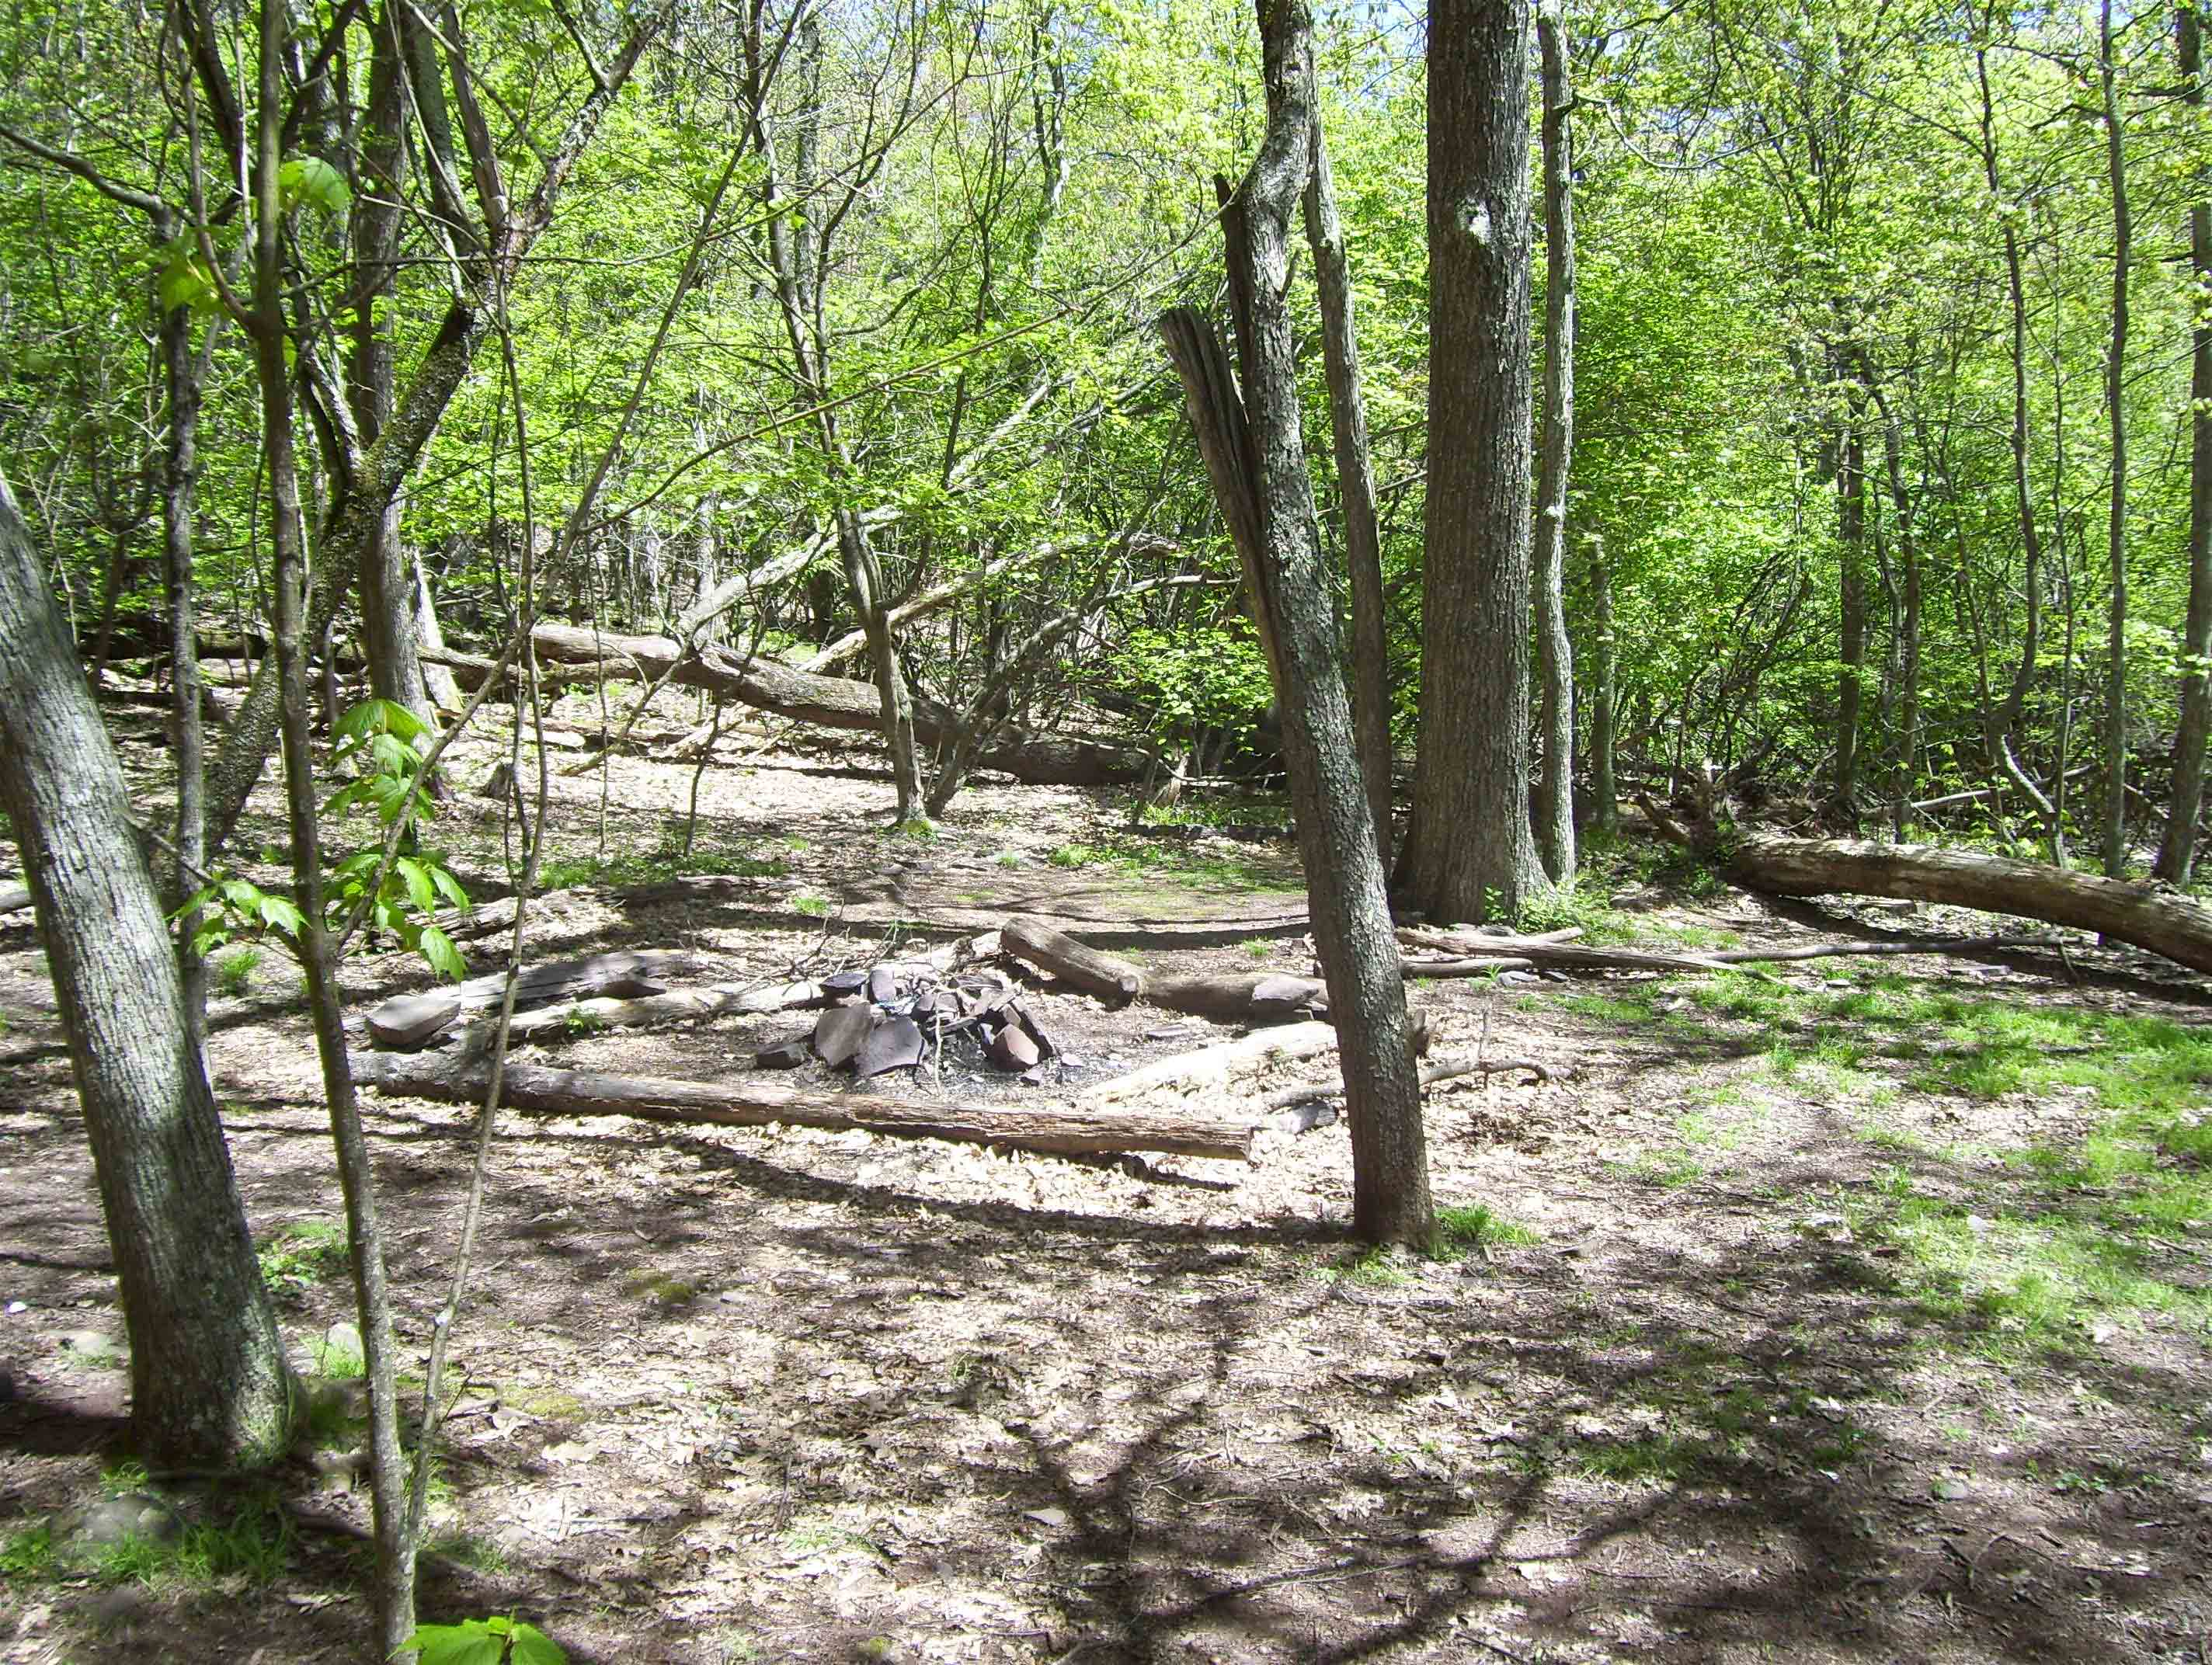 mm 4.5  Nice campsites near the spring in the previous picture.  Courtesy dlcul@conncoll.edu